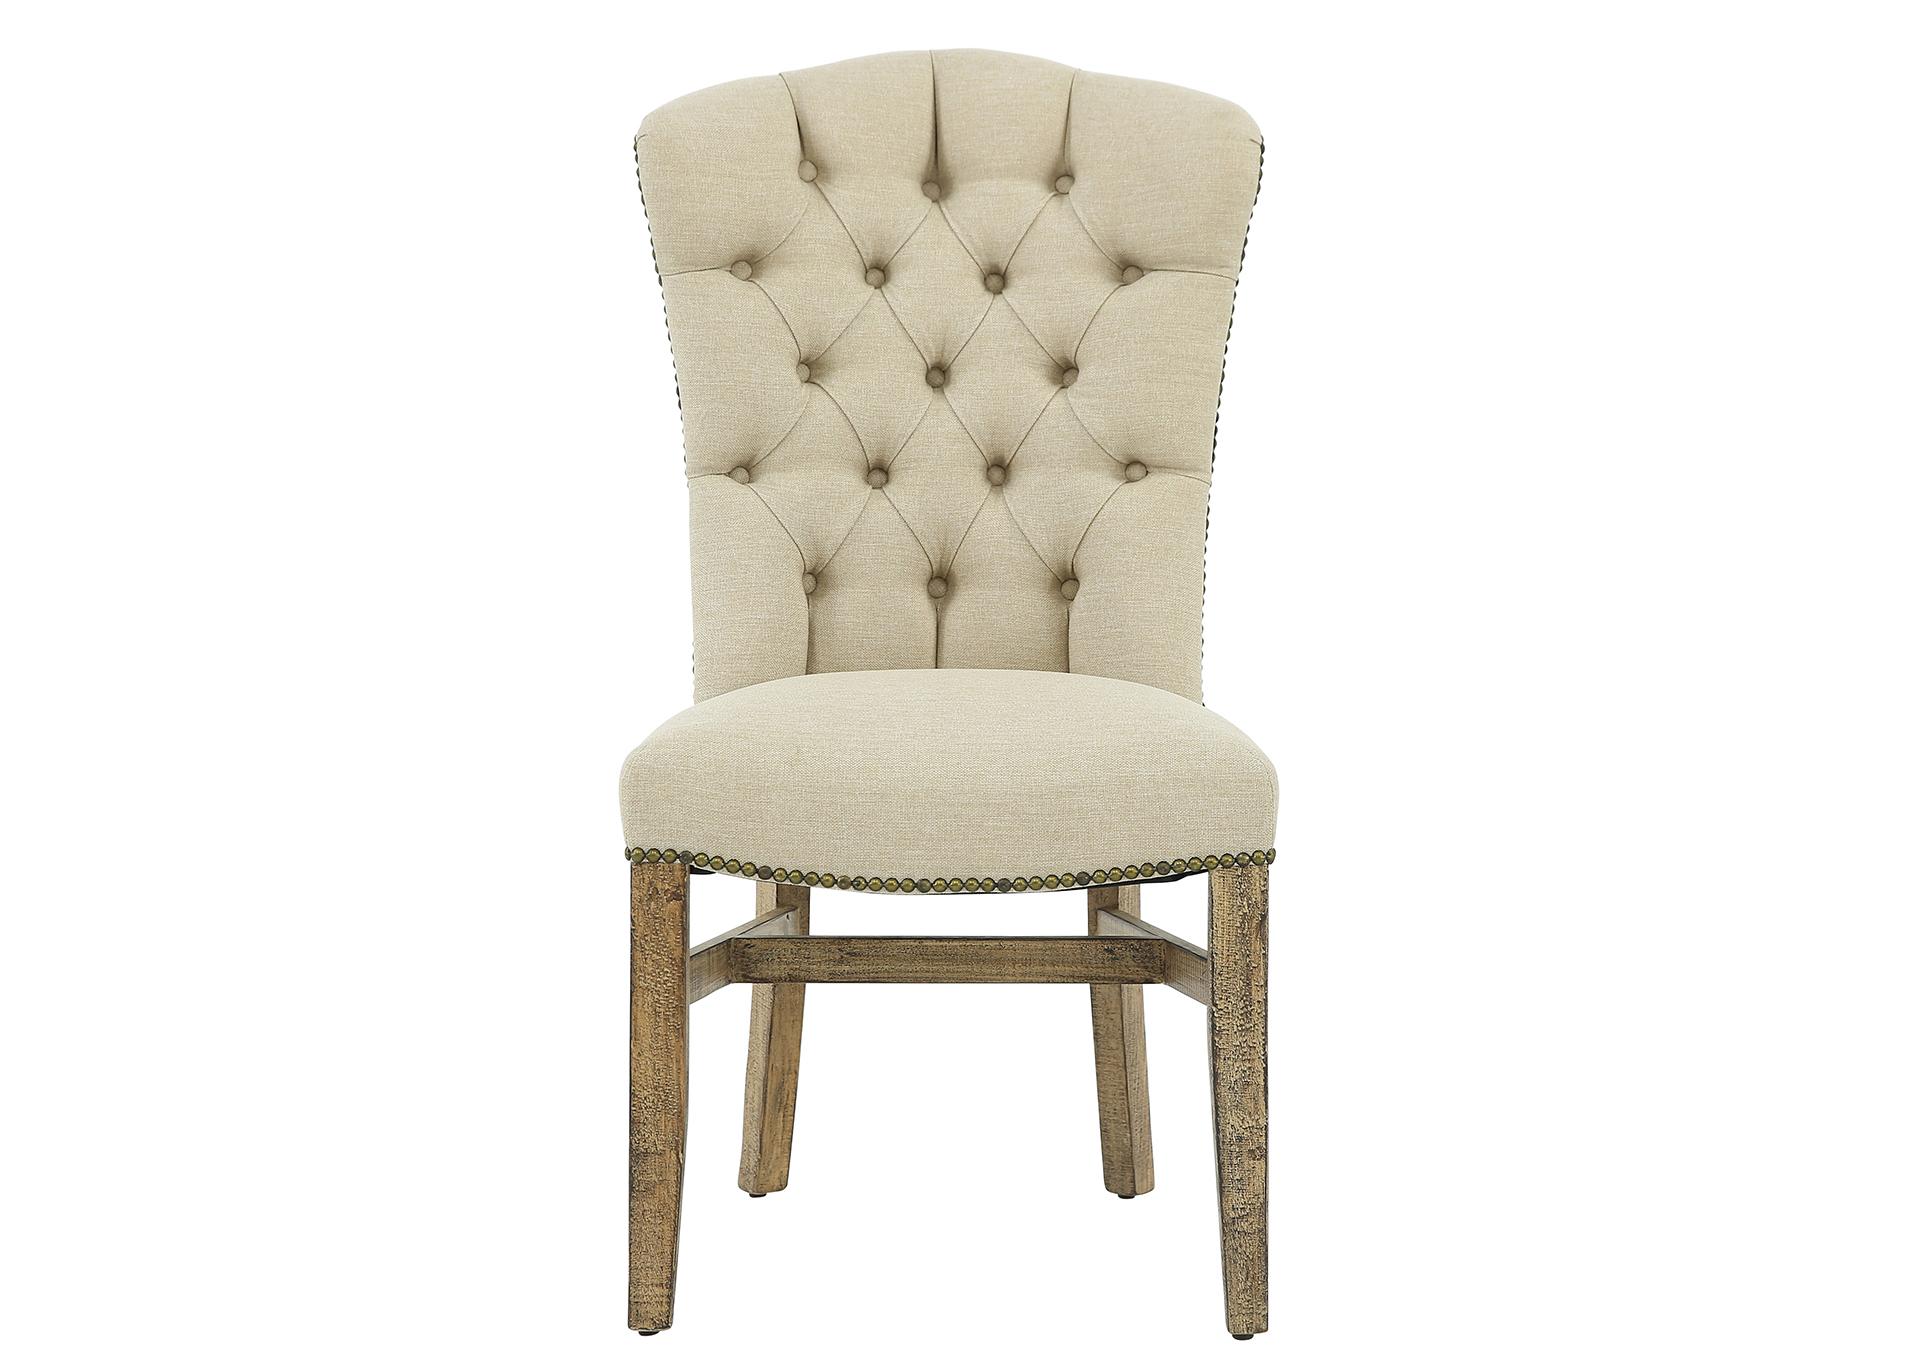 RENO AGAVE UPH TUFTED CHAIR,URBAN ROADS